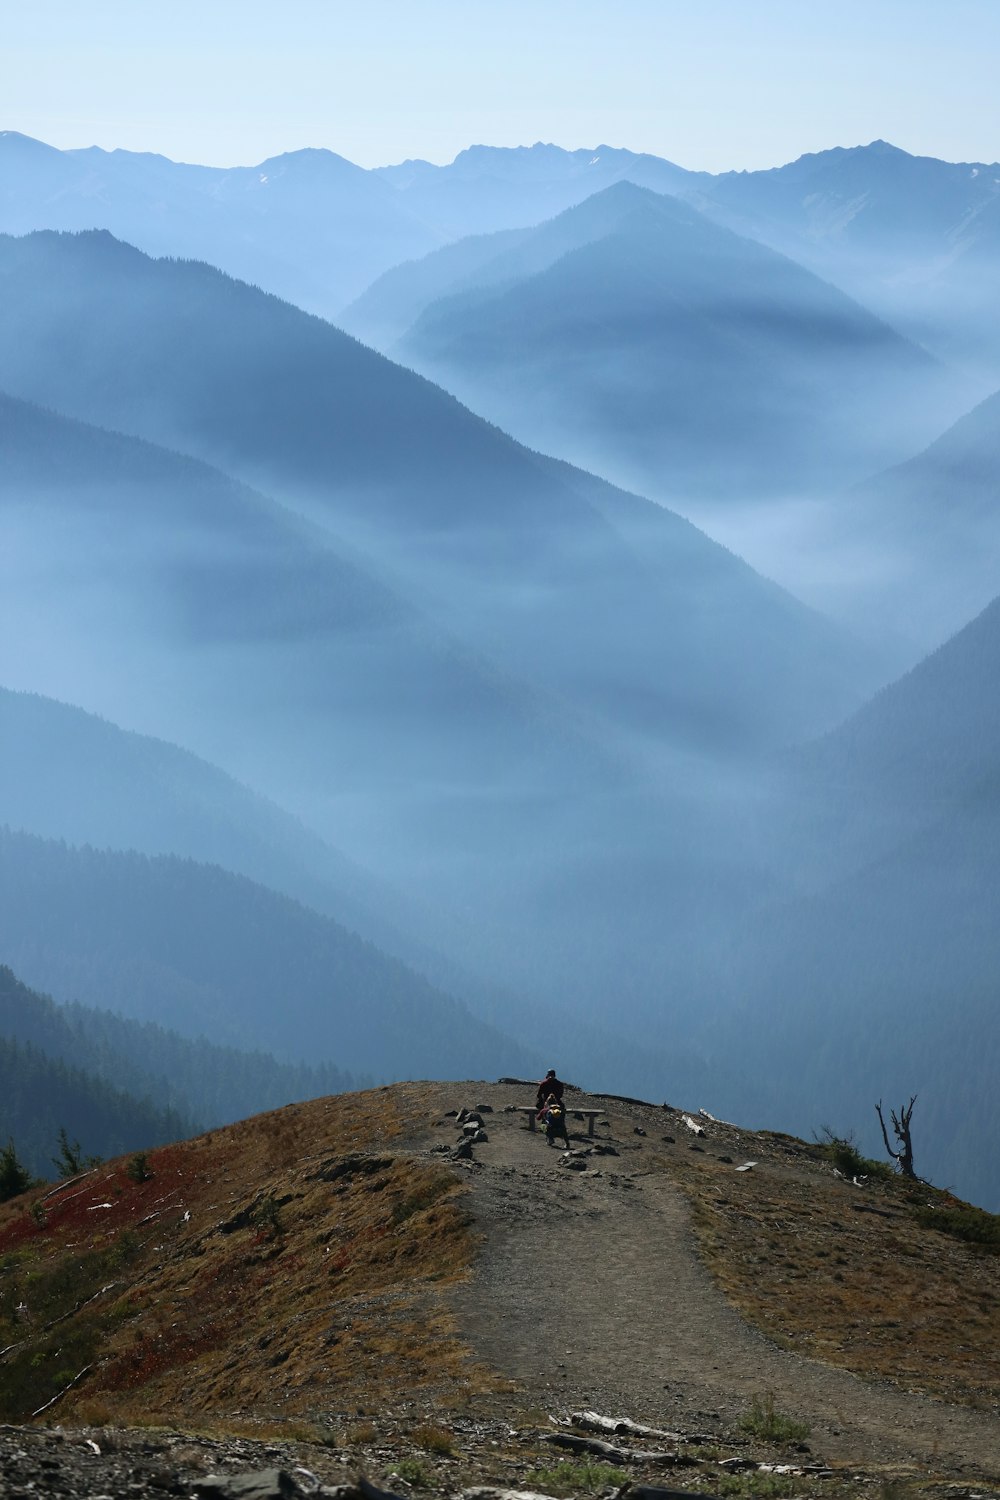 a person riding a bike on a trail in the mountains